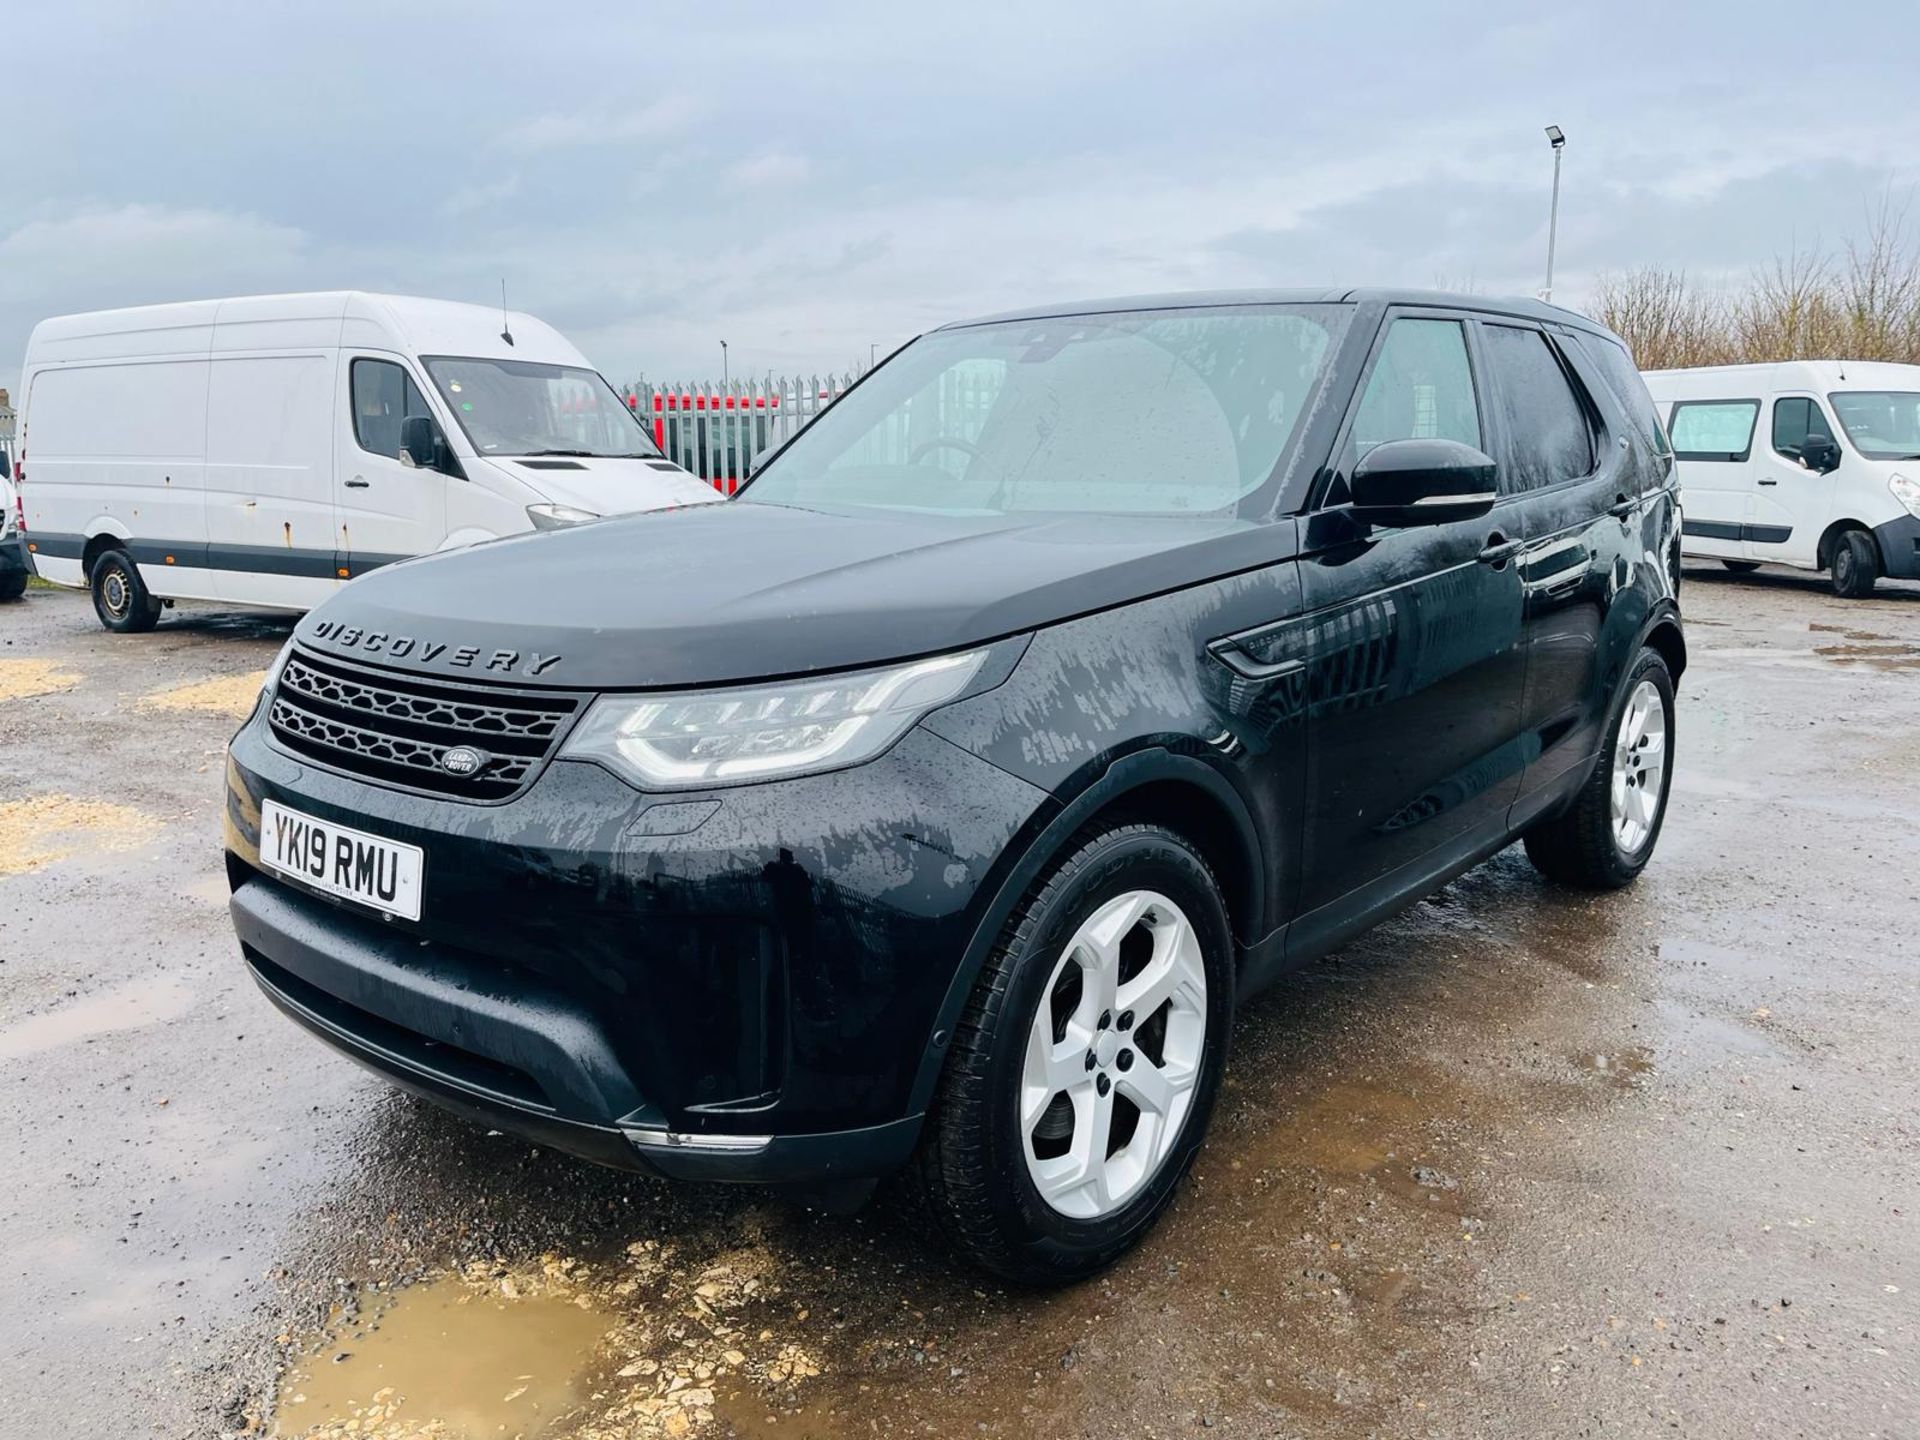 Land Rover Discovery SD4 HSE Edition 4WD Auto 2019 '19 Reg' Commercial - Sat Nav - A/C - Image 3 of 33